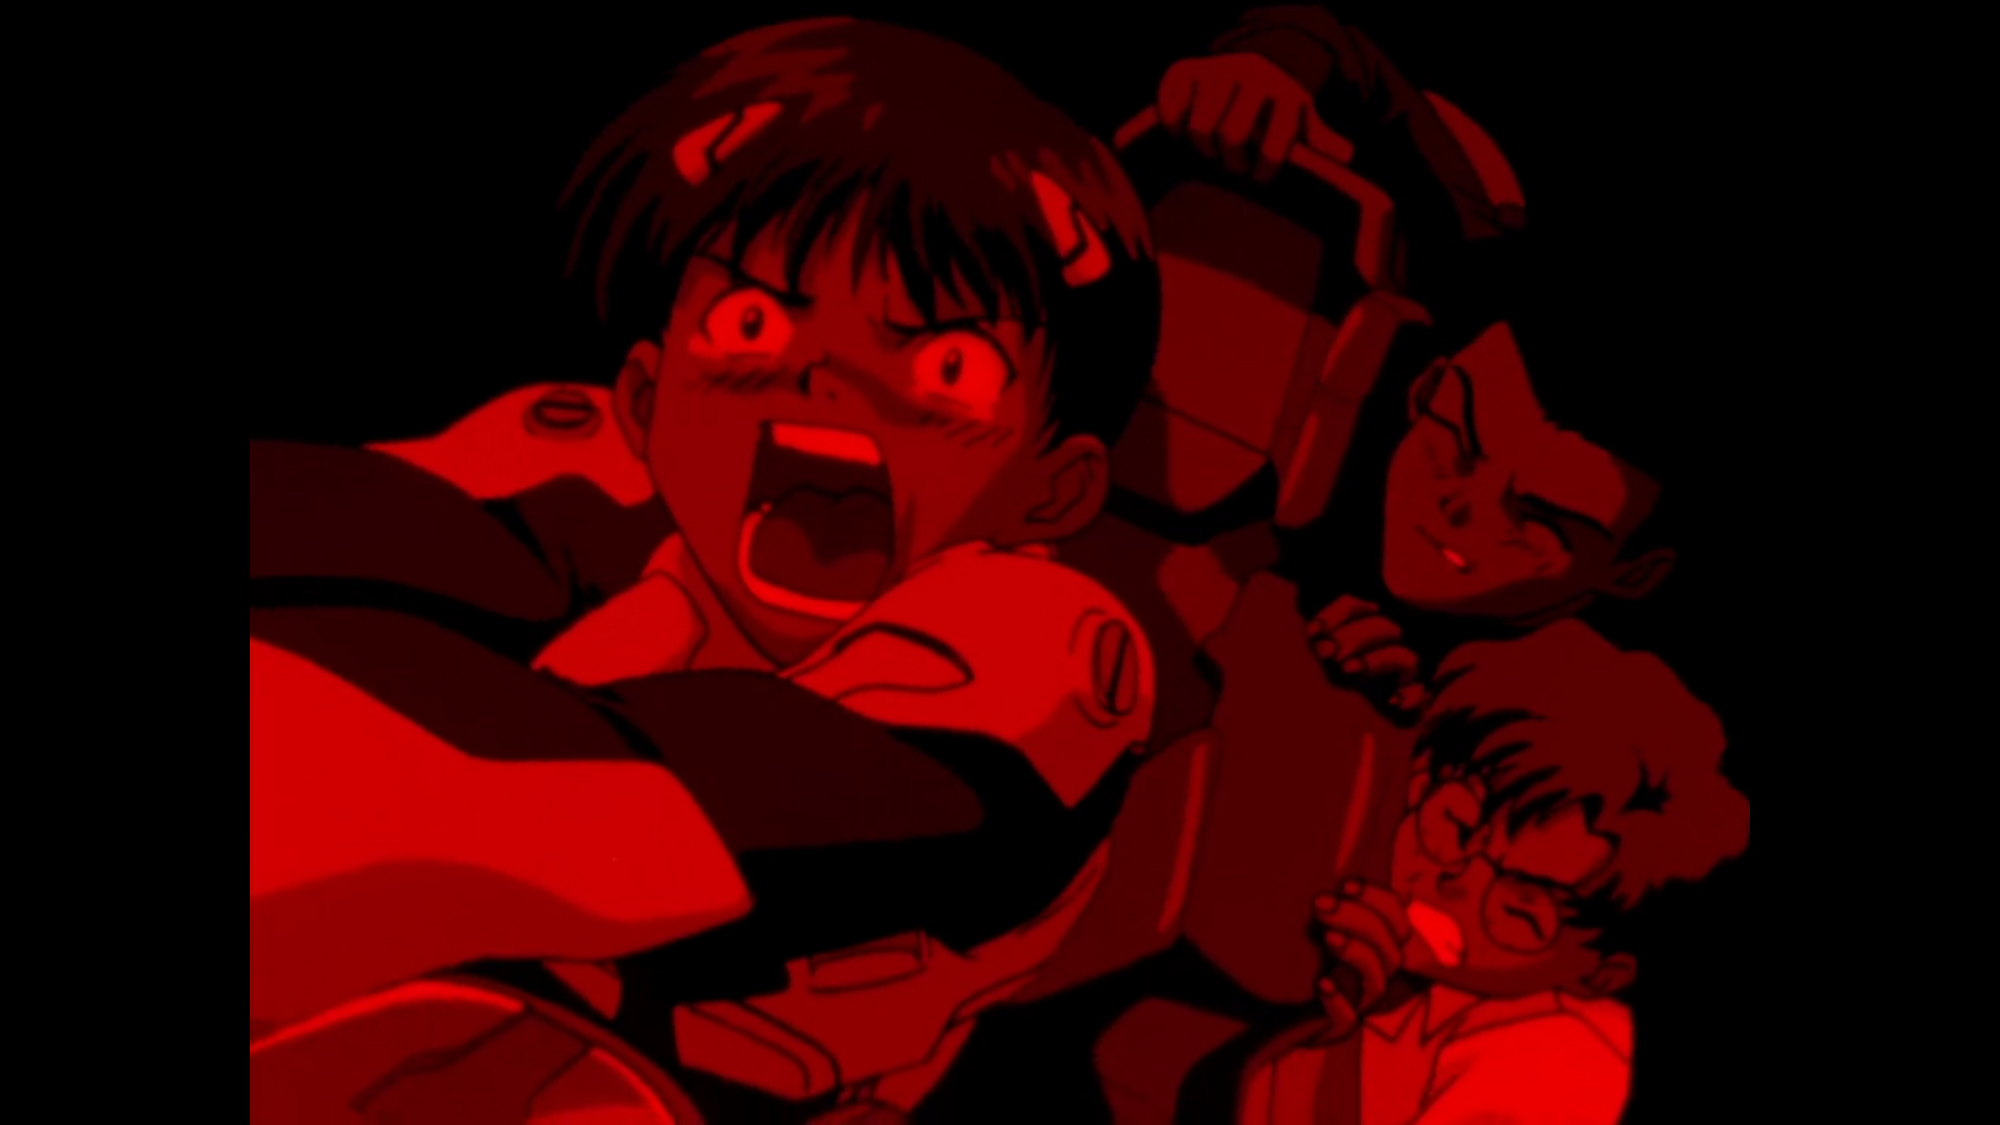 Shinji, as the point-of-view character, is a totally unreliable narrator. 